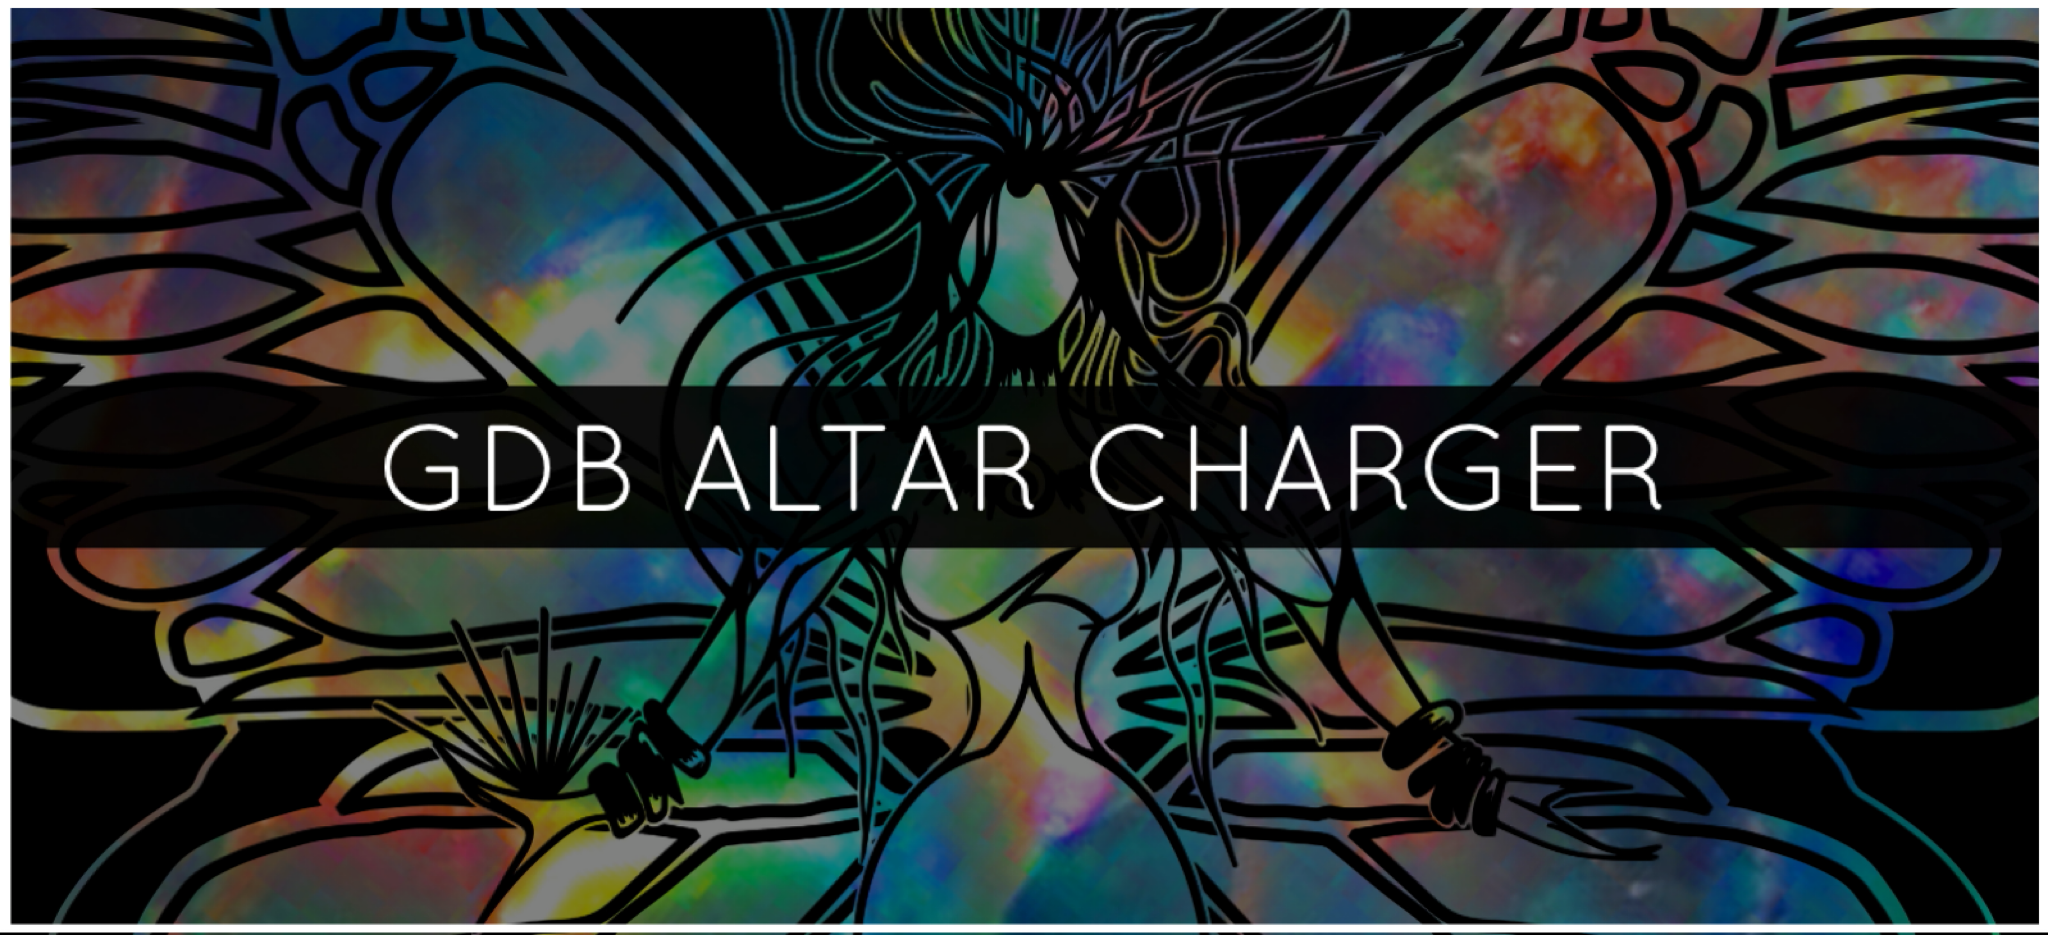 GDB ALTAR CHARGER